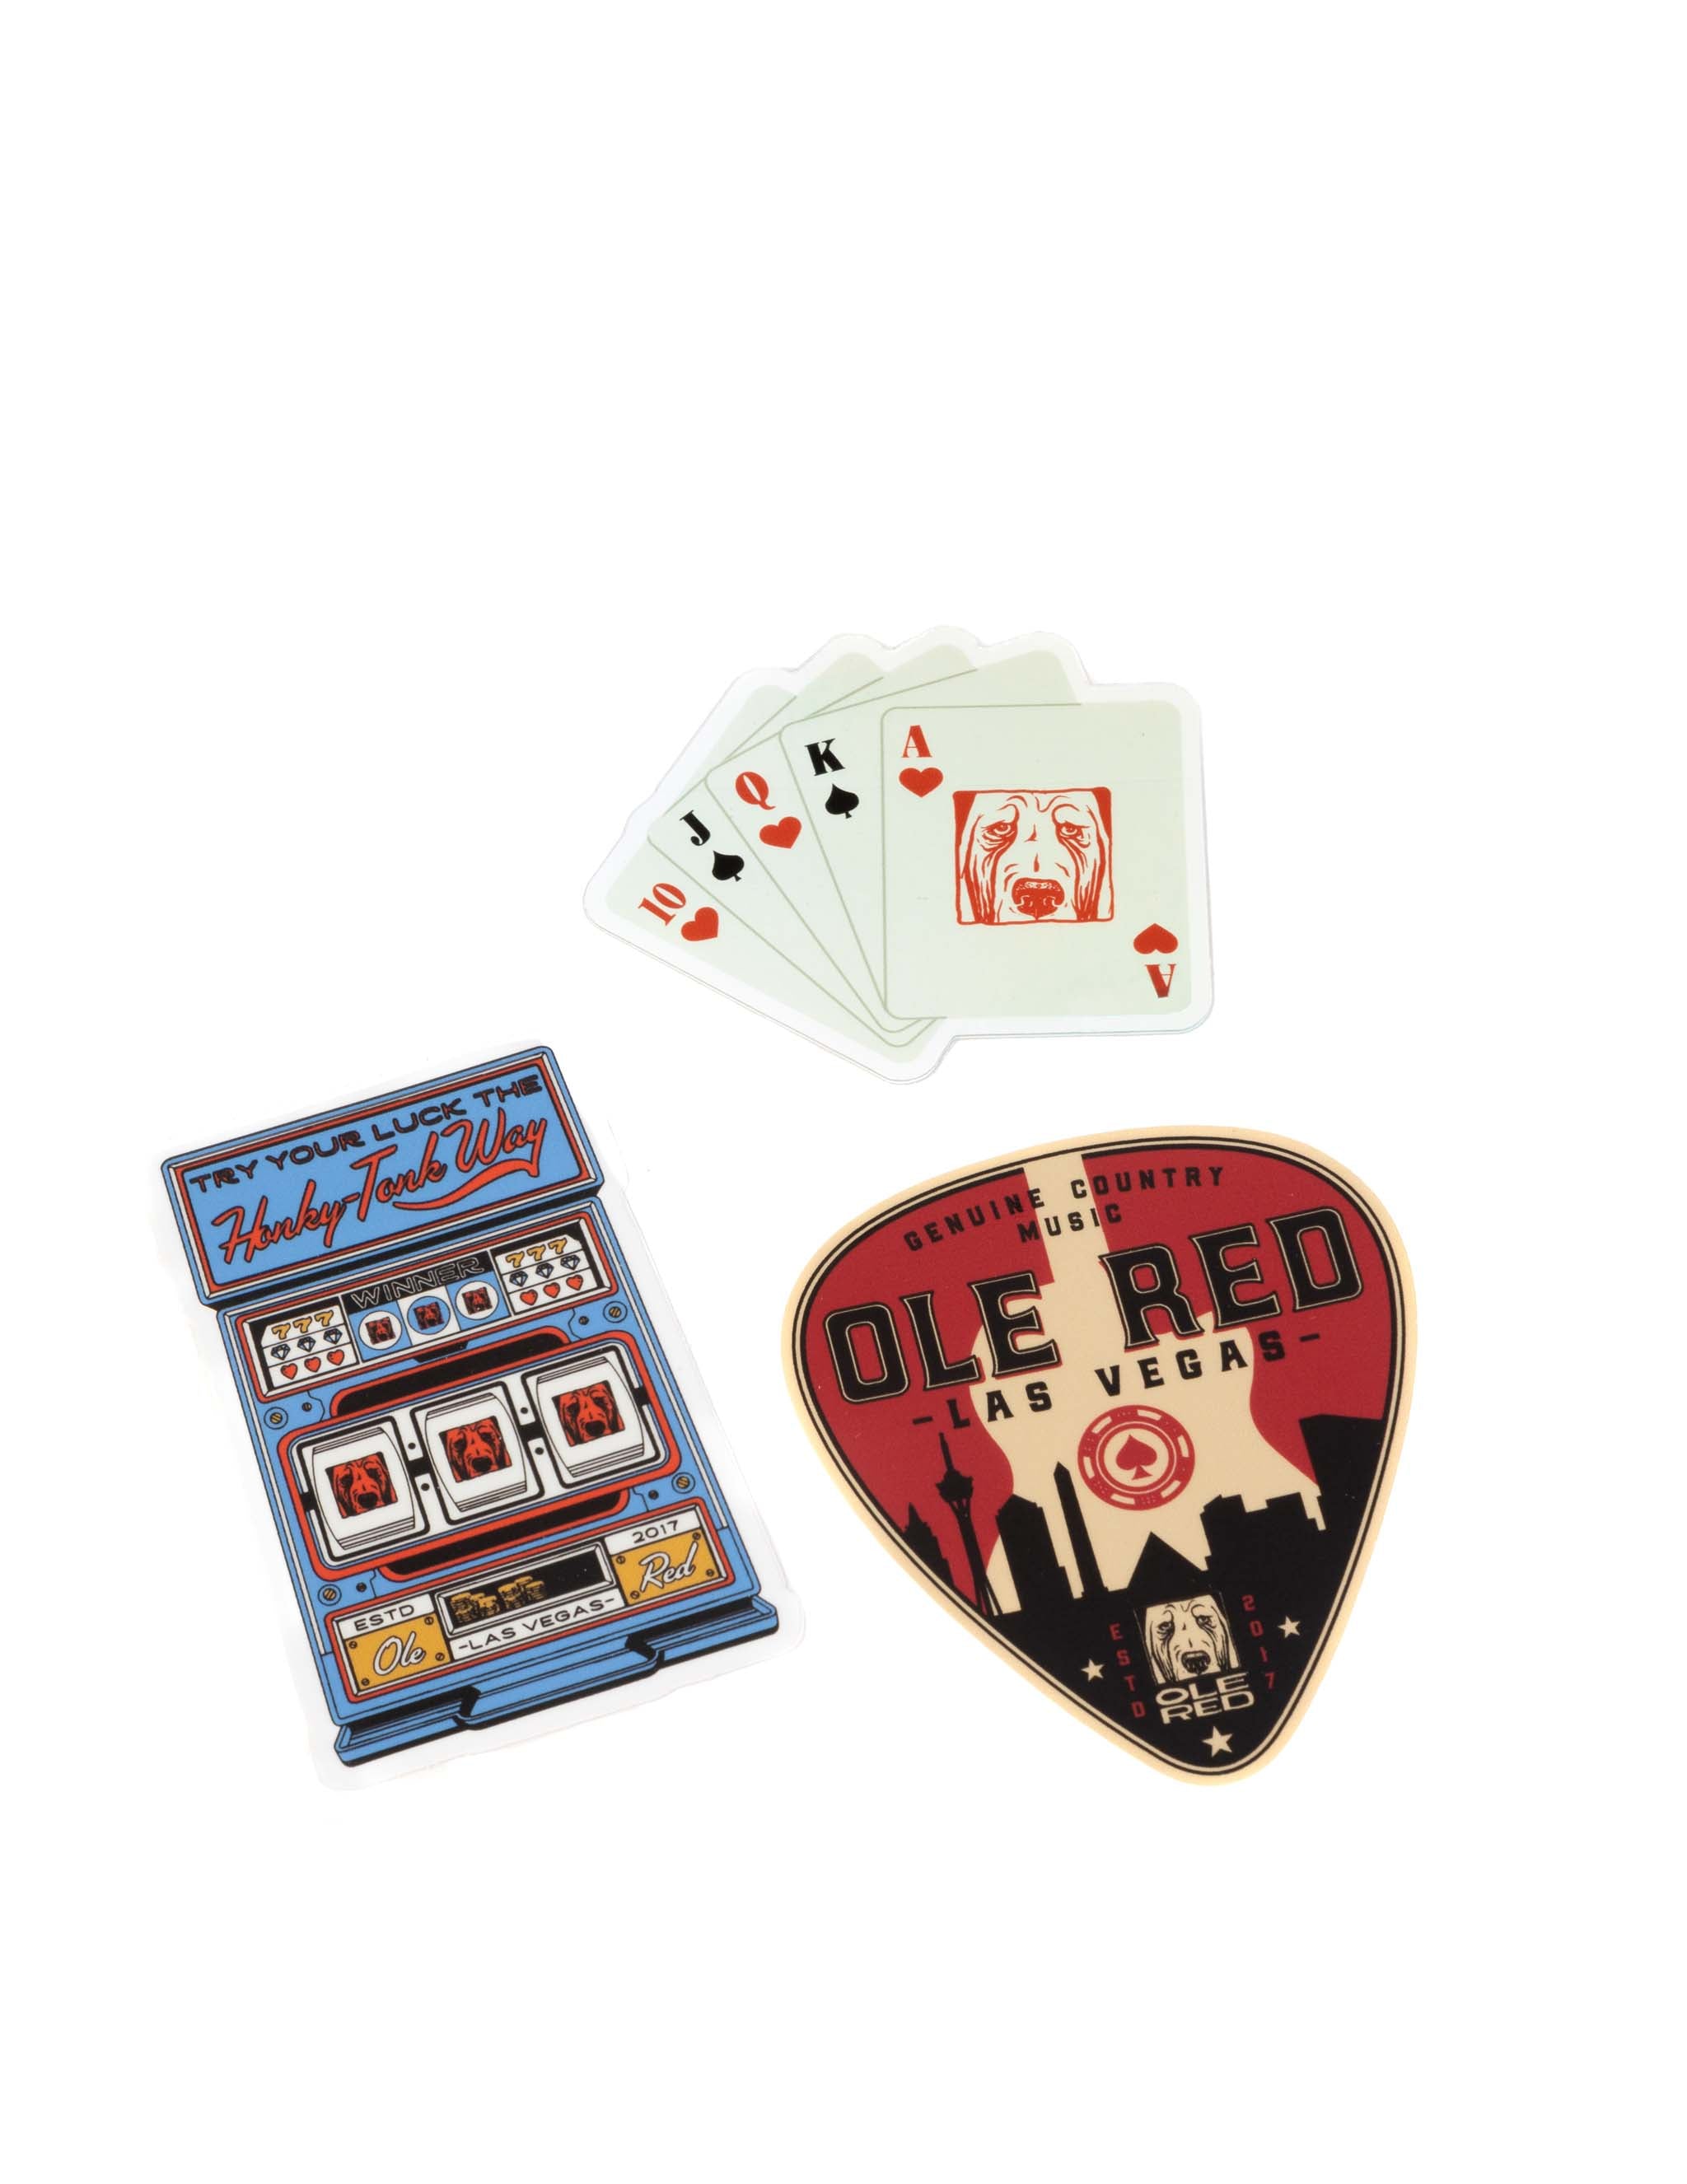 Ole Red Vegas 3-Pack Decal Set